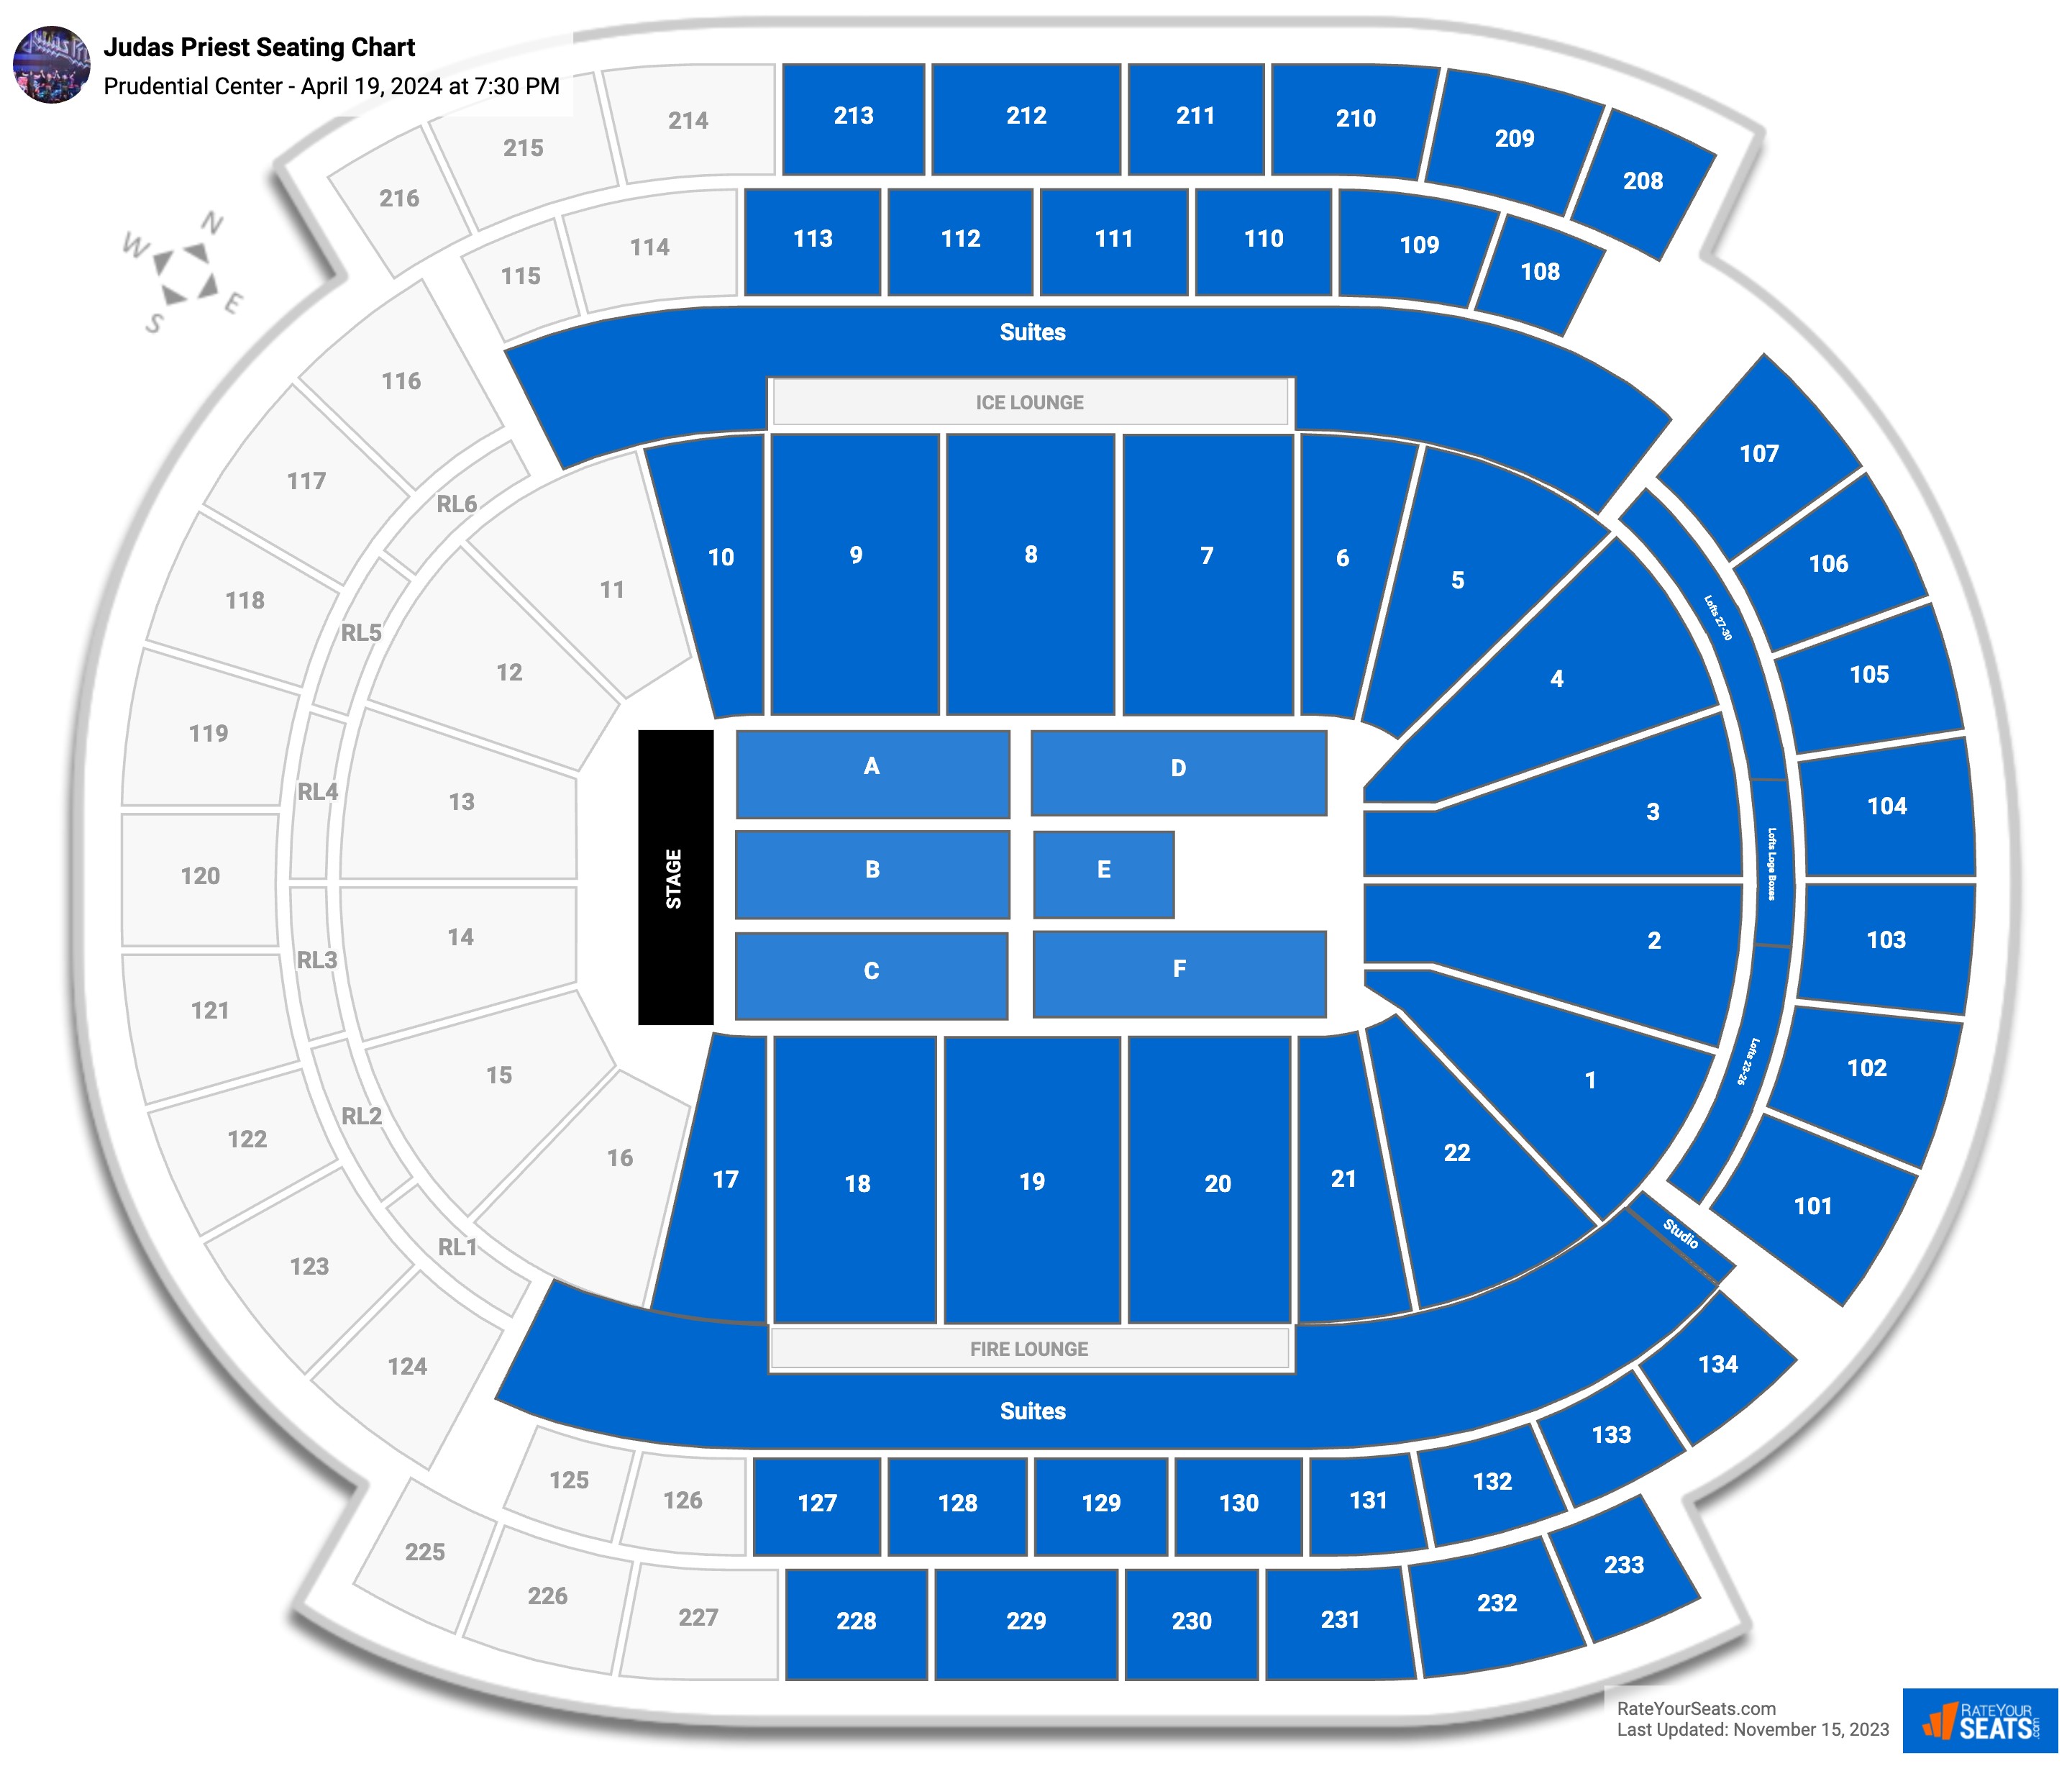 Prudential Center Concert Seating Chart - RateYourSeats.com